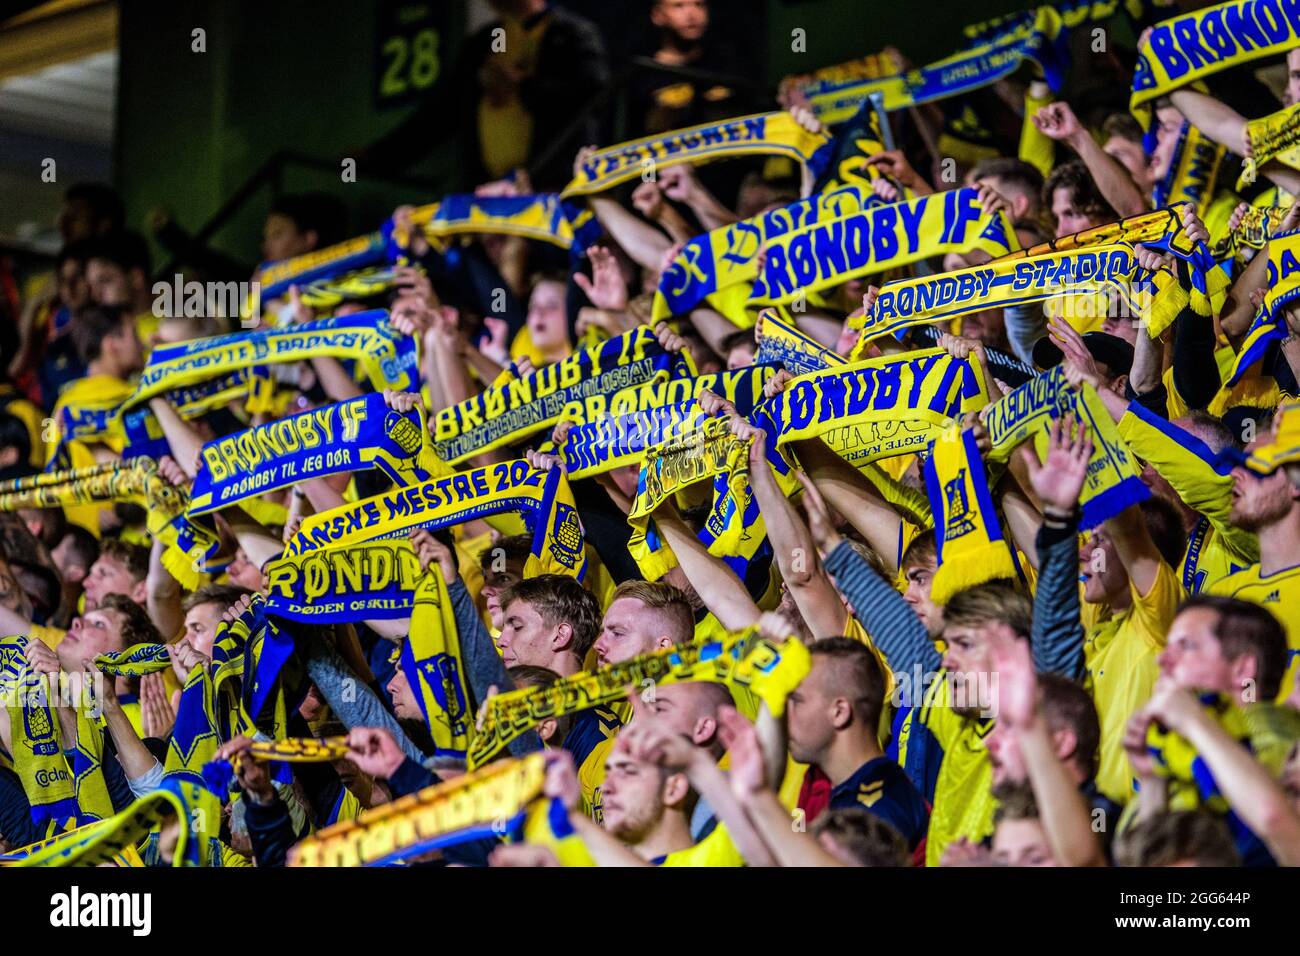 Broendby, Denmark. 25th, August 2021. Football fans of Broendby IF seen on  the stands during the UEFA Champions League qualification match between  Broendby IF and FC Red Bull Salzburg at Broendby Stadion